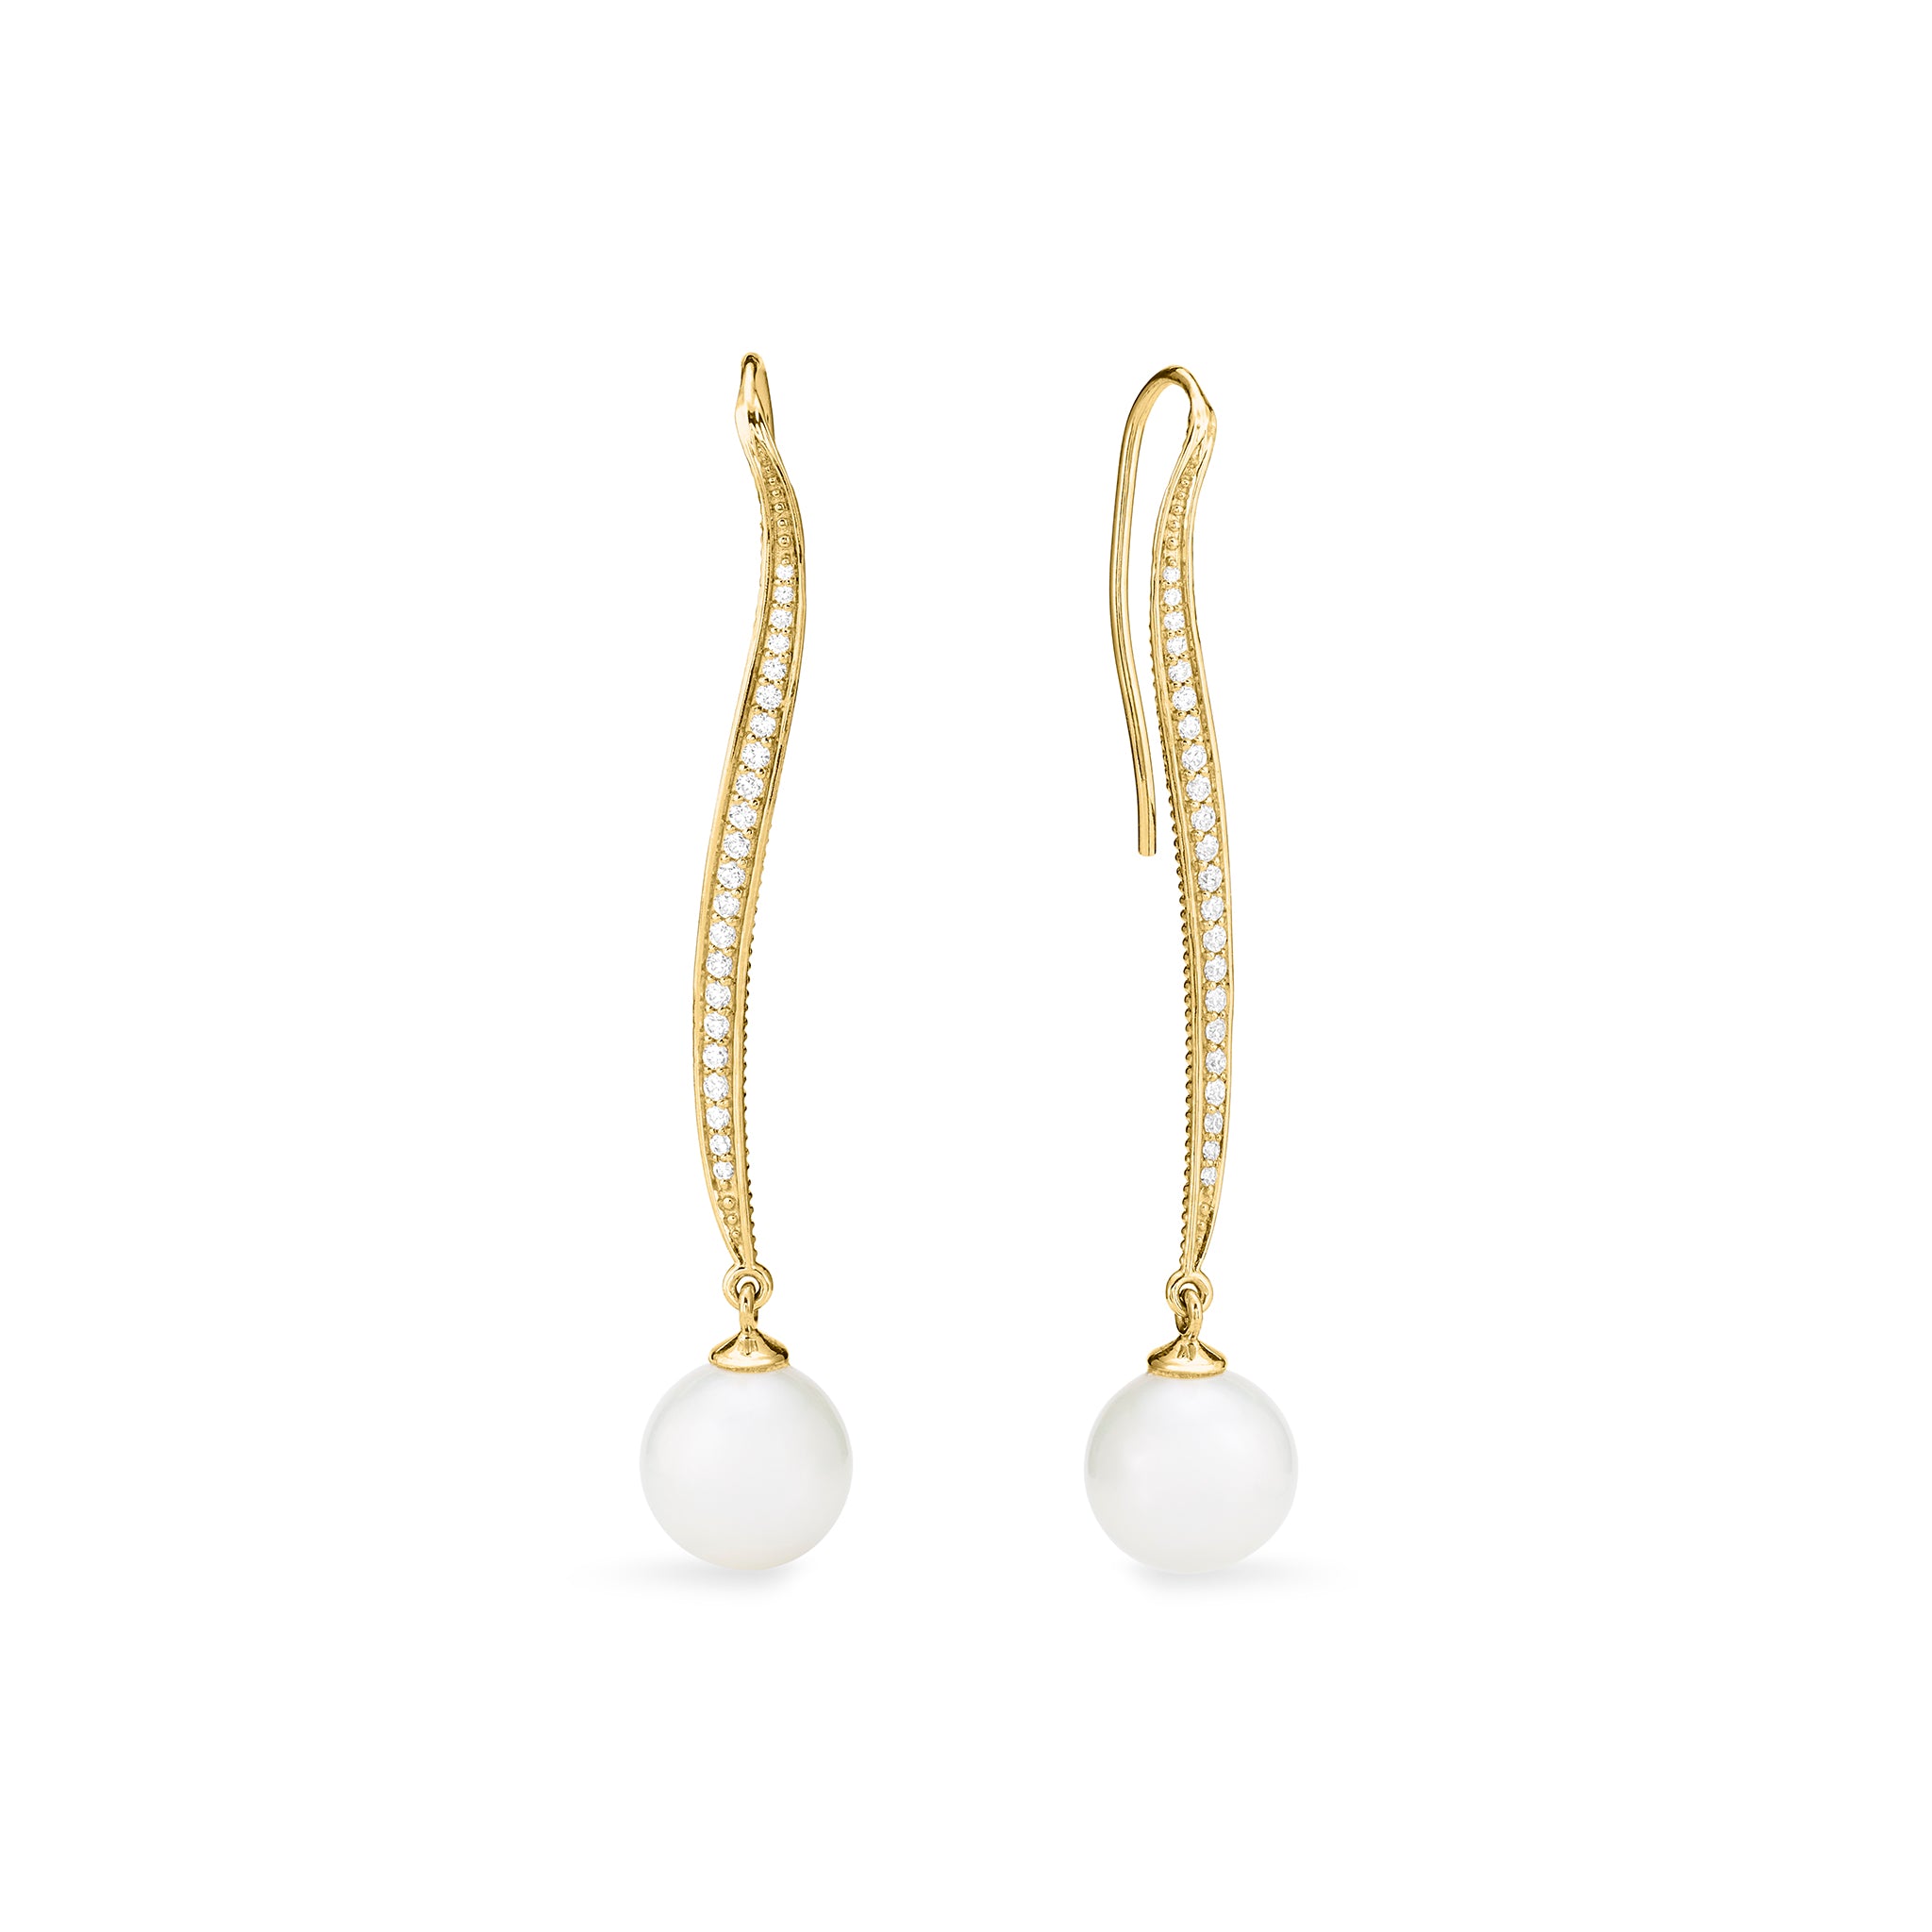 Shima Long Drop Earrings With Freshwater Pearls And Diamonds In 18K